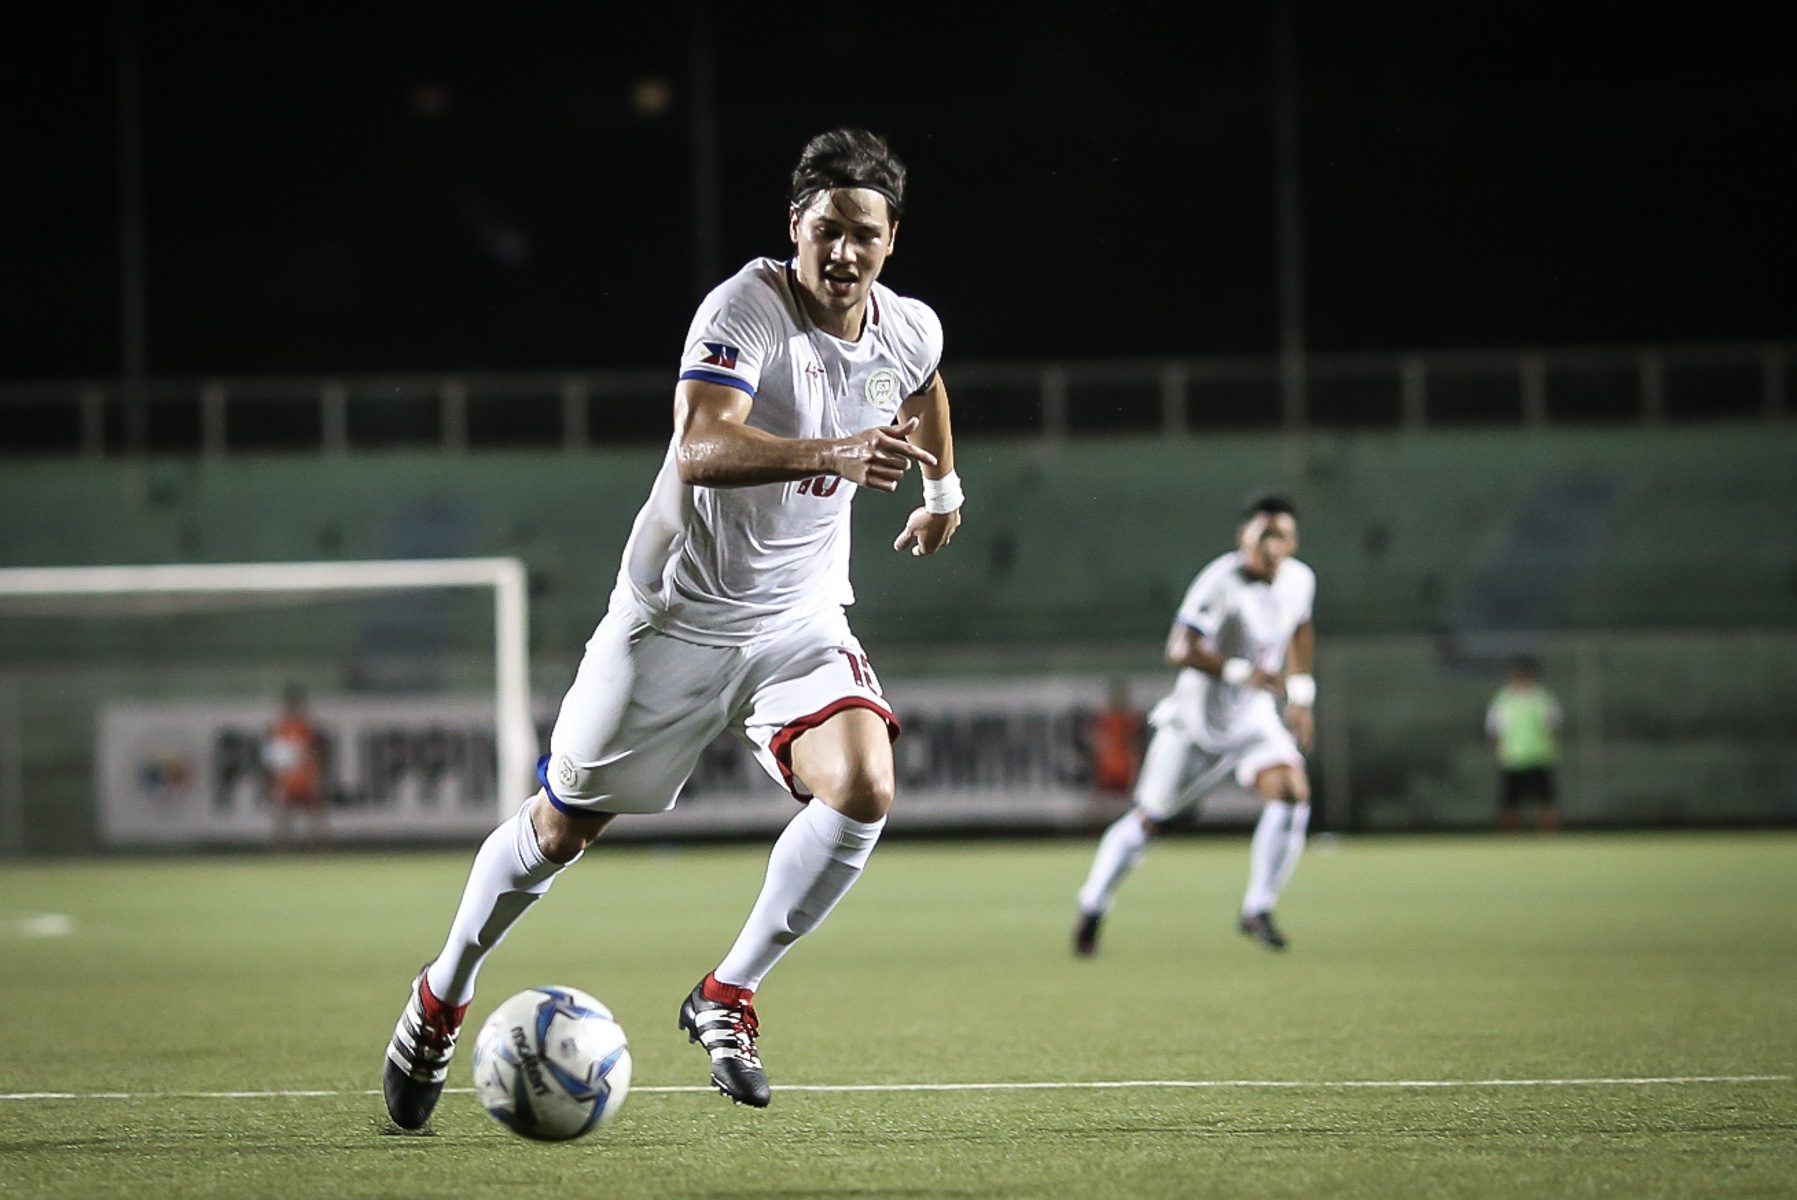 DPR Korea 3, Azkals 1 Postgame: Lots of work to be done